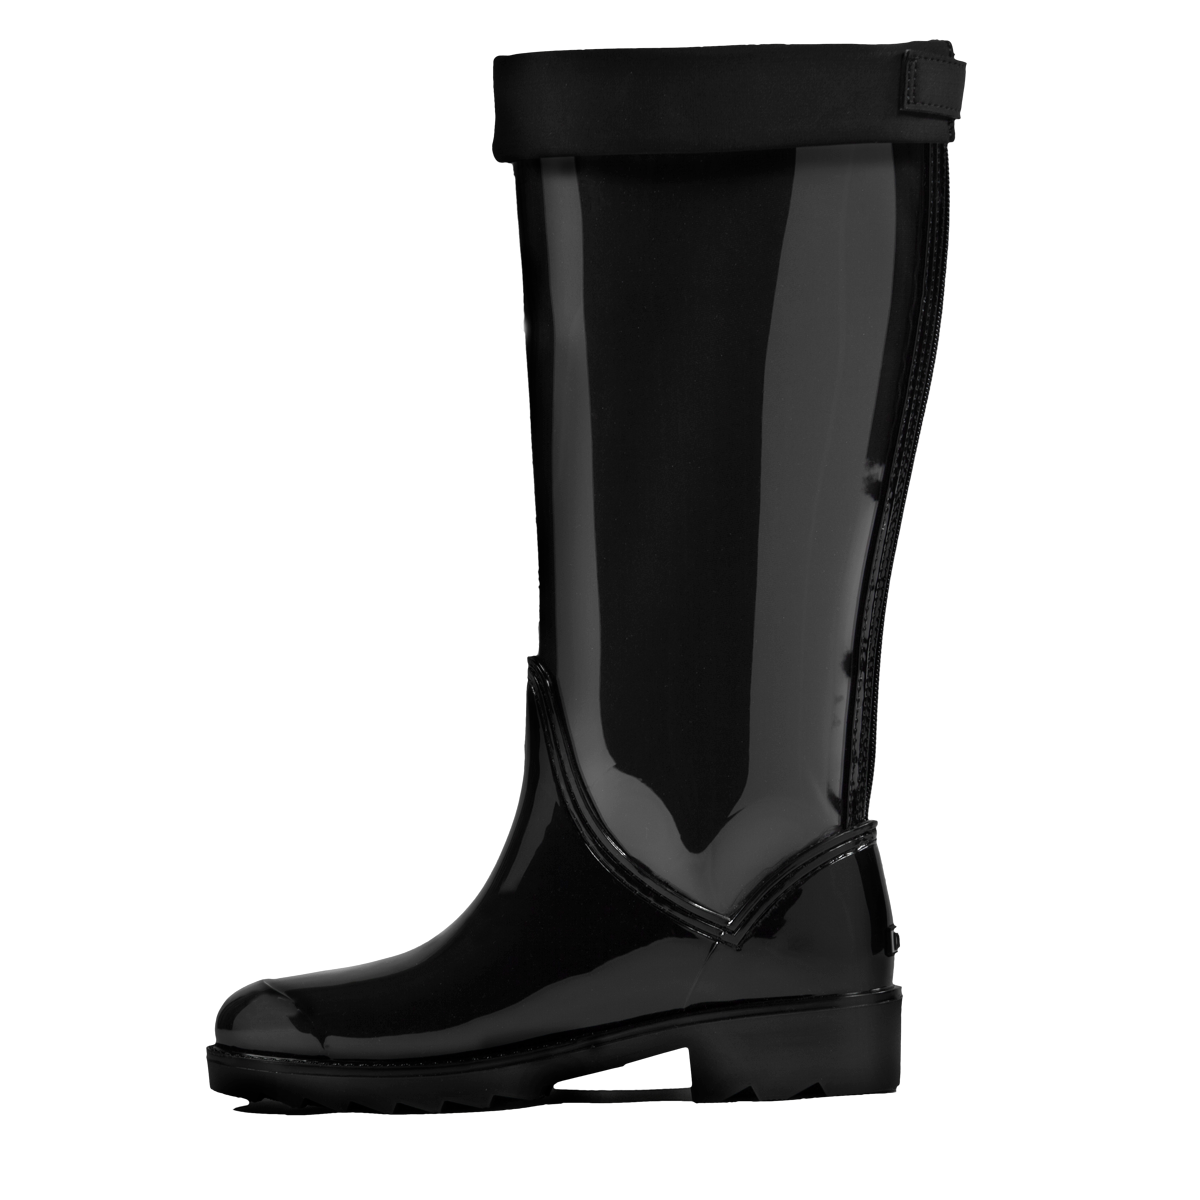 Download PNG image - Rain Boot Background PNG 